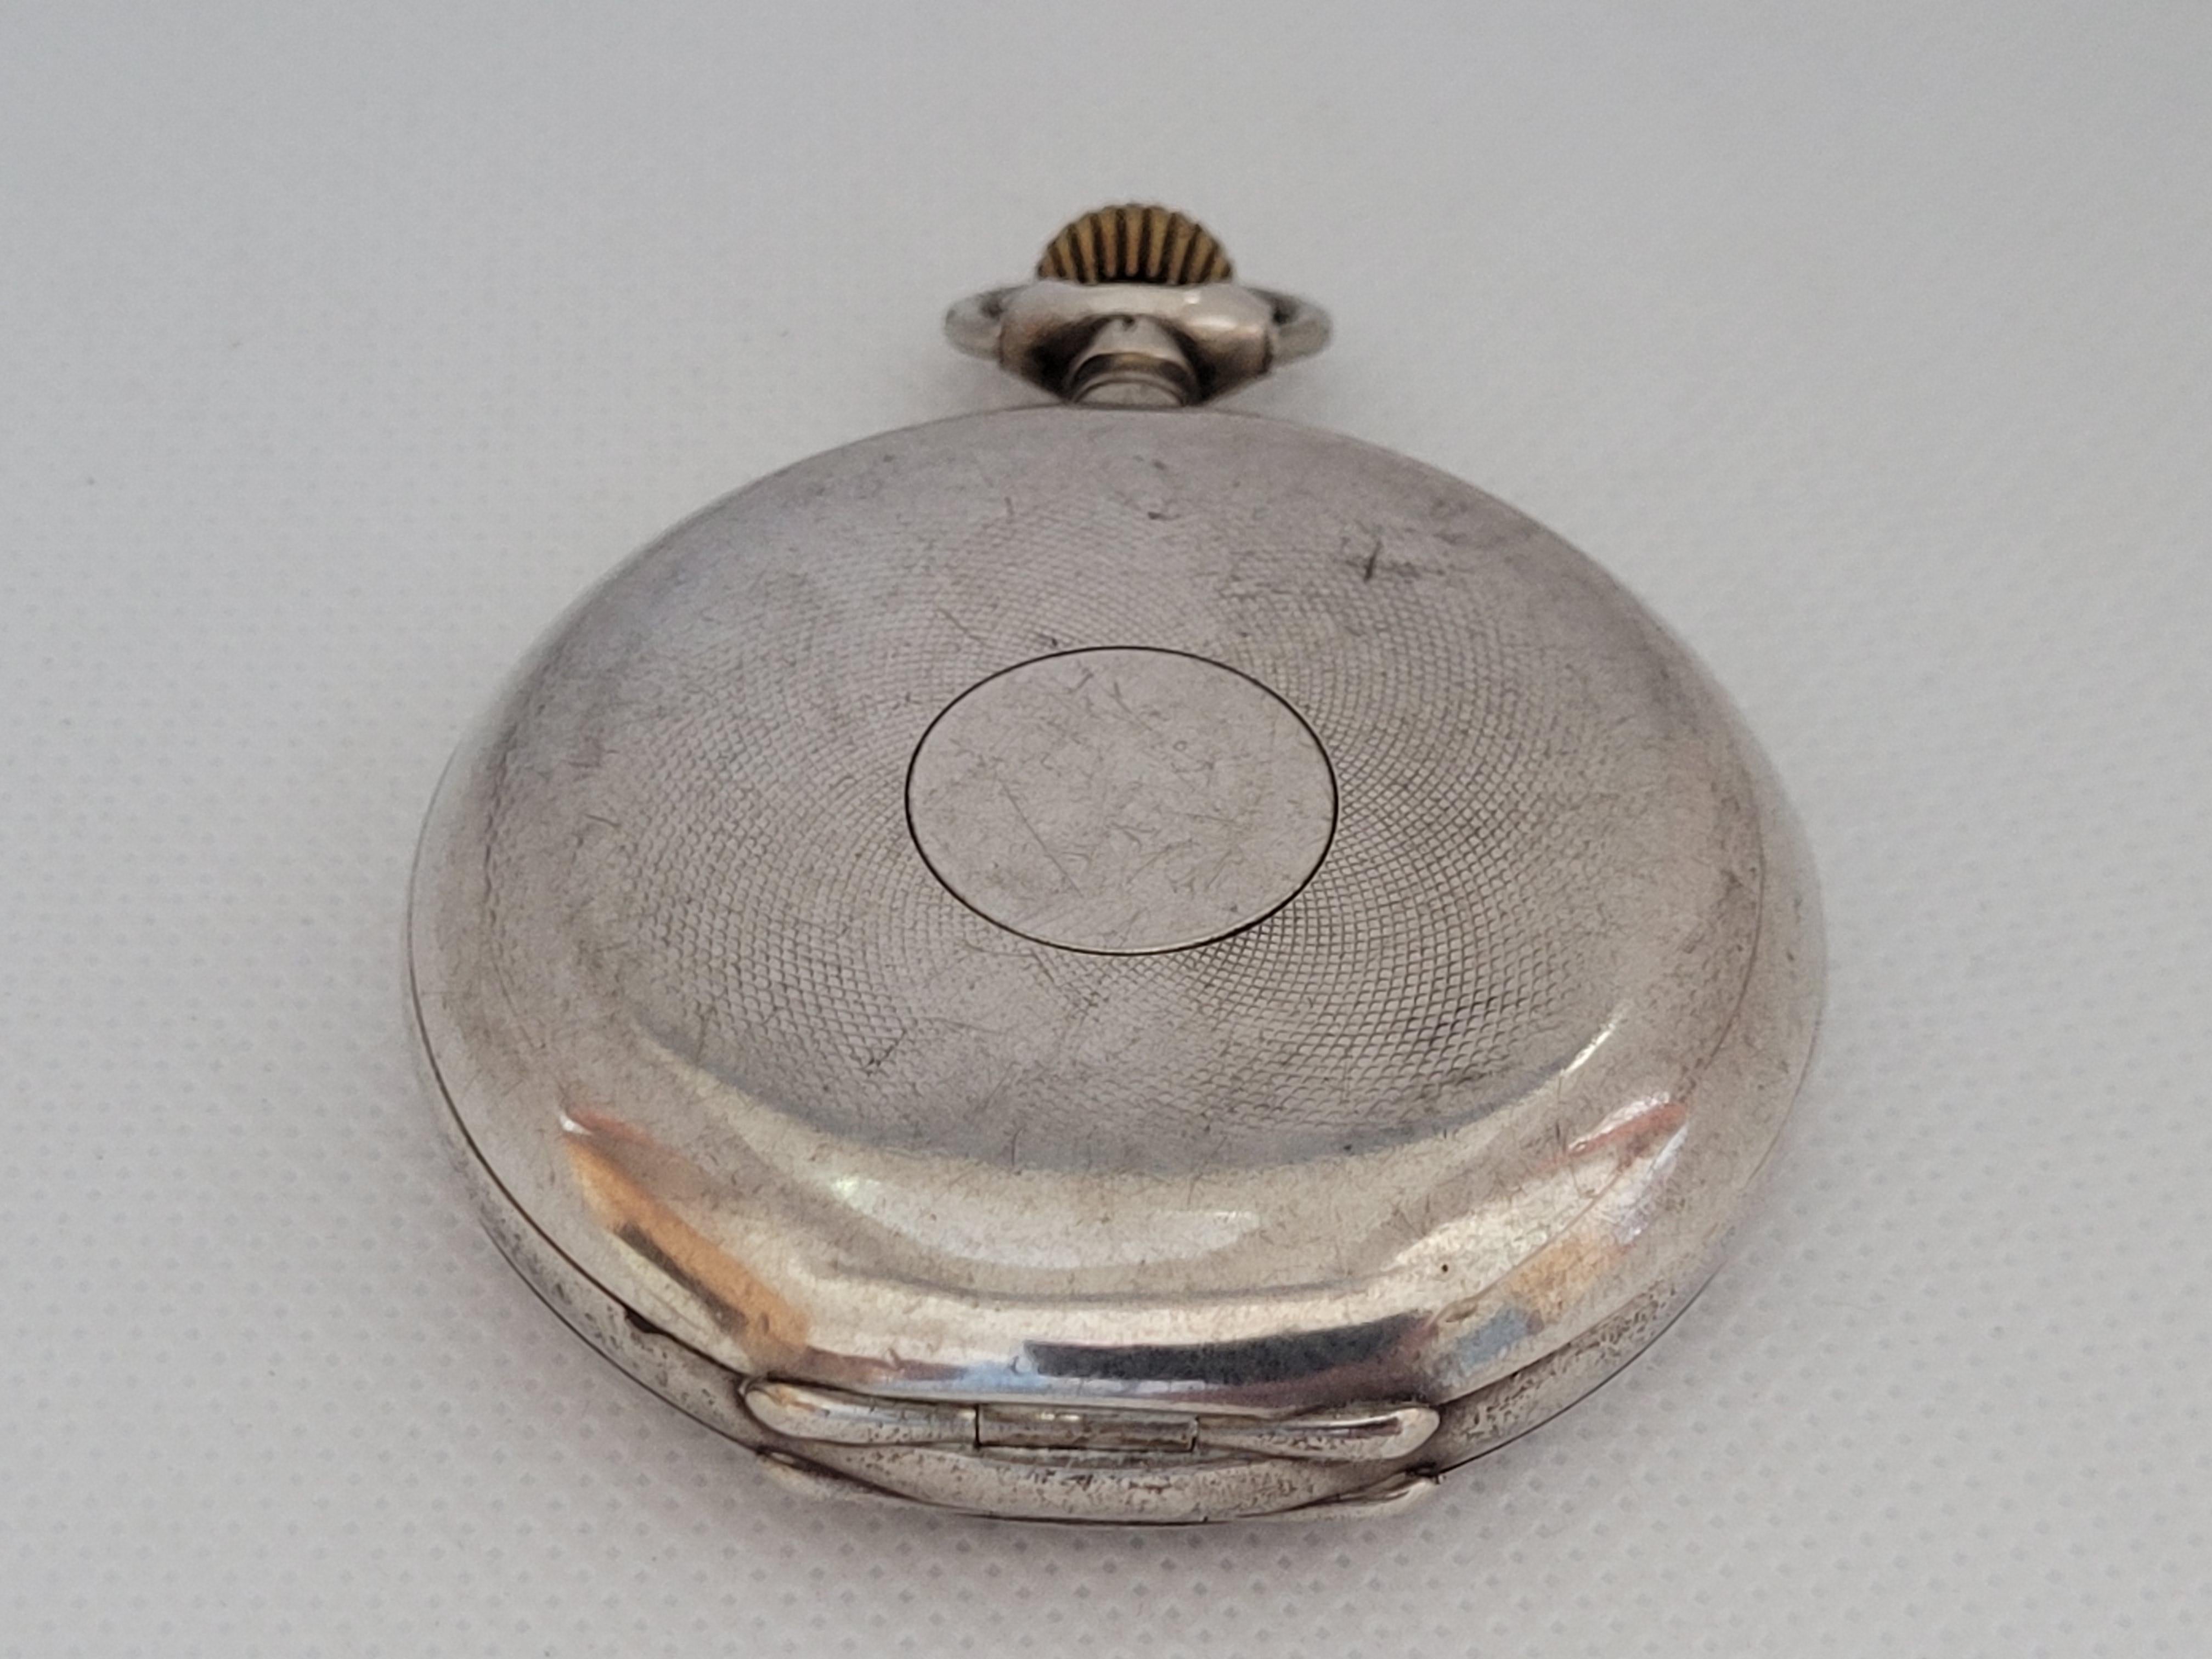 P. Moser 875 silver pocket watch that has a 51mm case, 13.5mm thick, with a clean plastic crystal. The manual movement is working with serial number 176469. Overall, this pocket watch is in very nice condition with slight blemishes.  

Although this